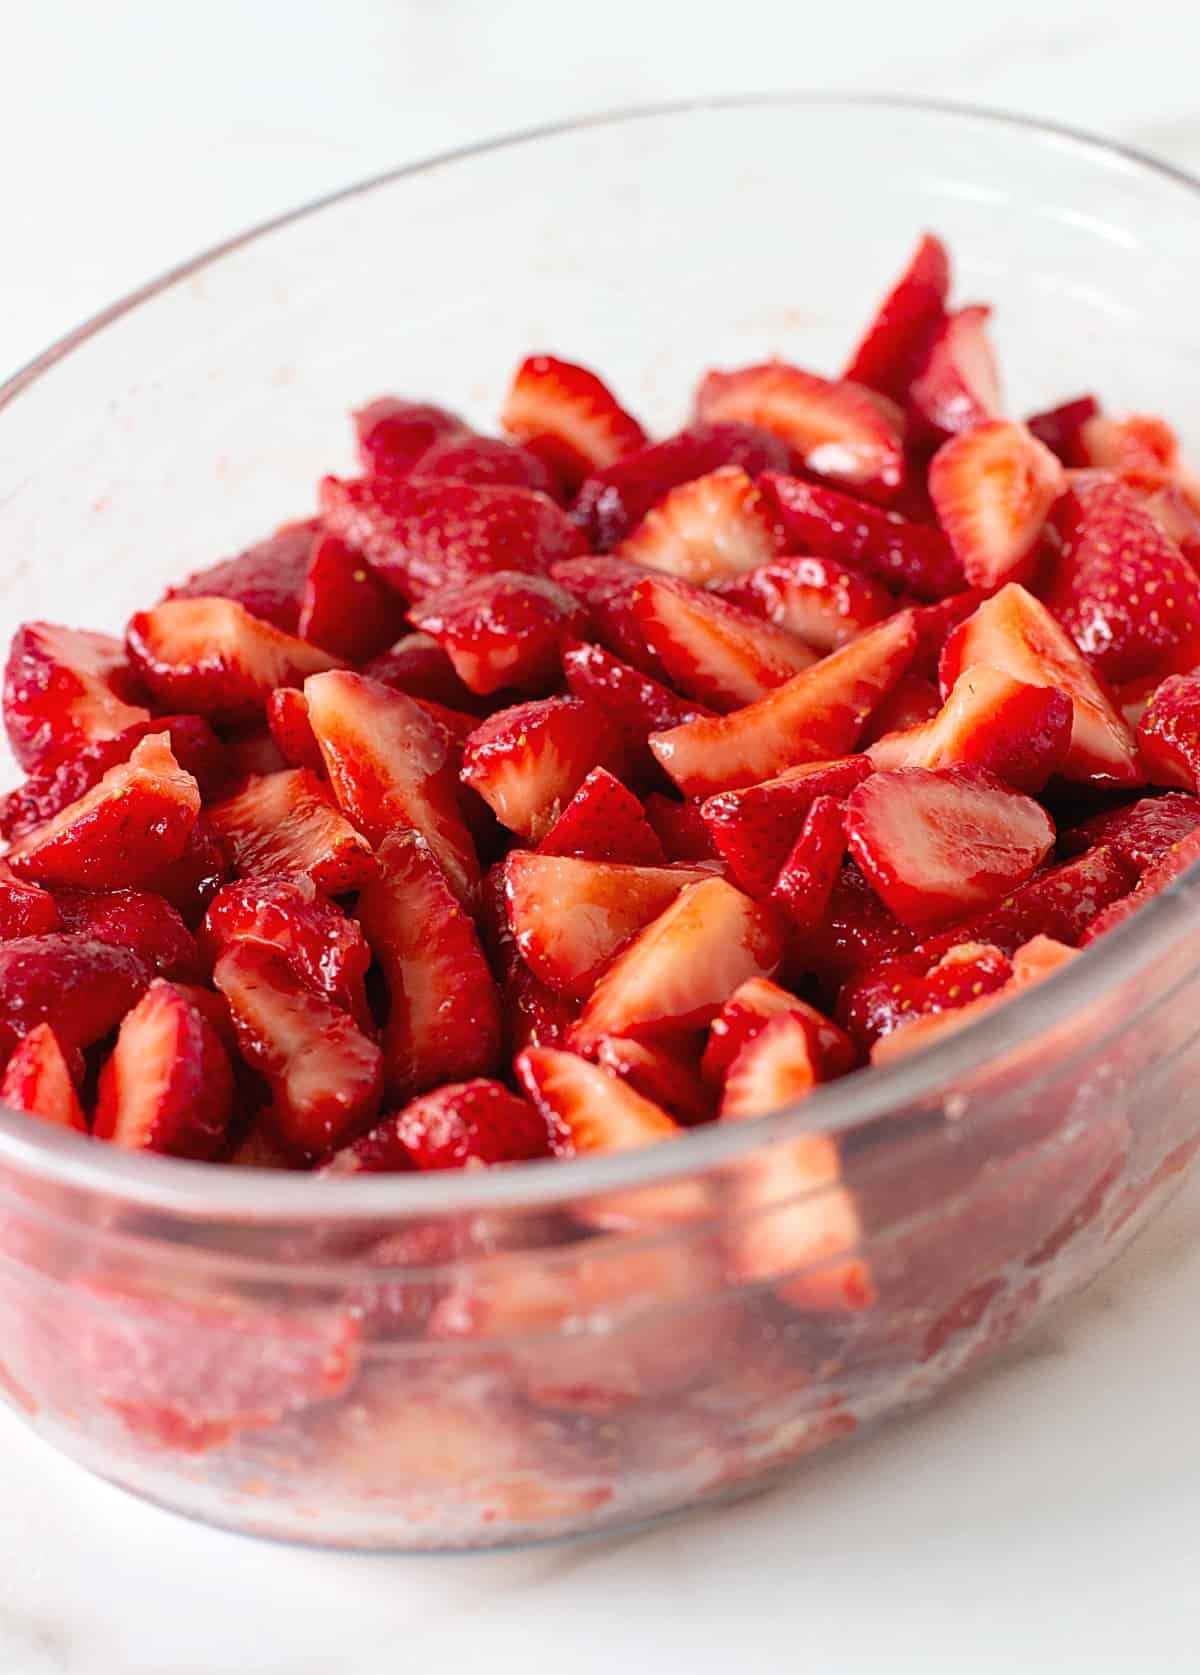 Glass oval dish with cut-up strawberries